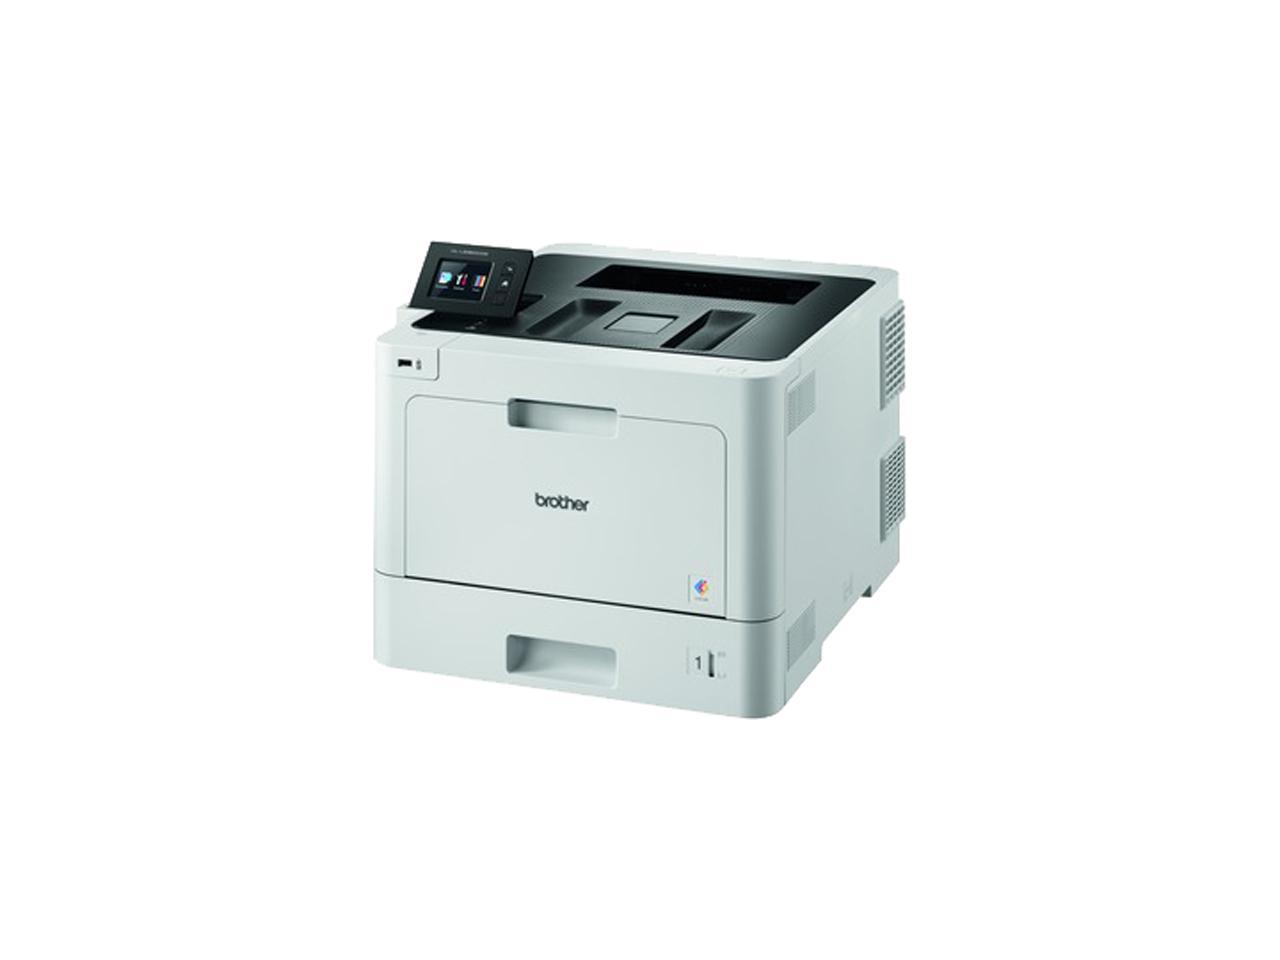 Brother HL Series HL-L8360CDW Workgroup Up to 33 ppm 2400 x 600 dpi Color Print Quality Color Wireless 802.11b/g/n Laser Laser Printers